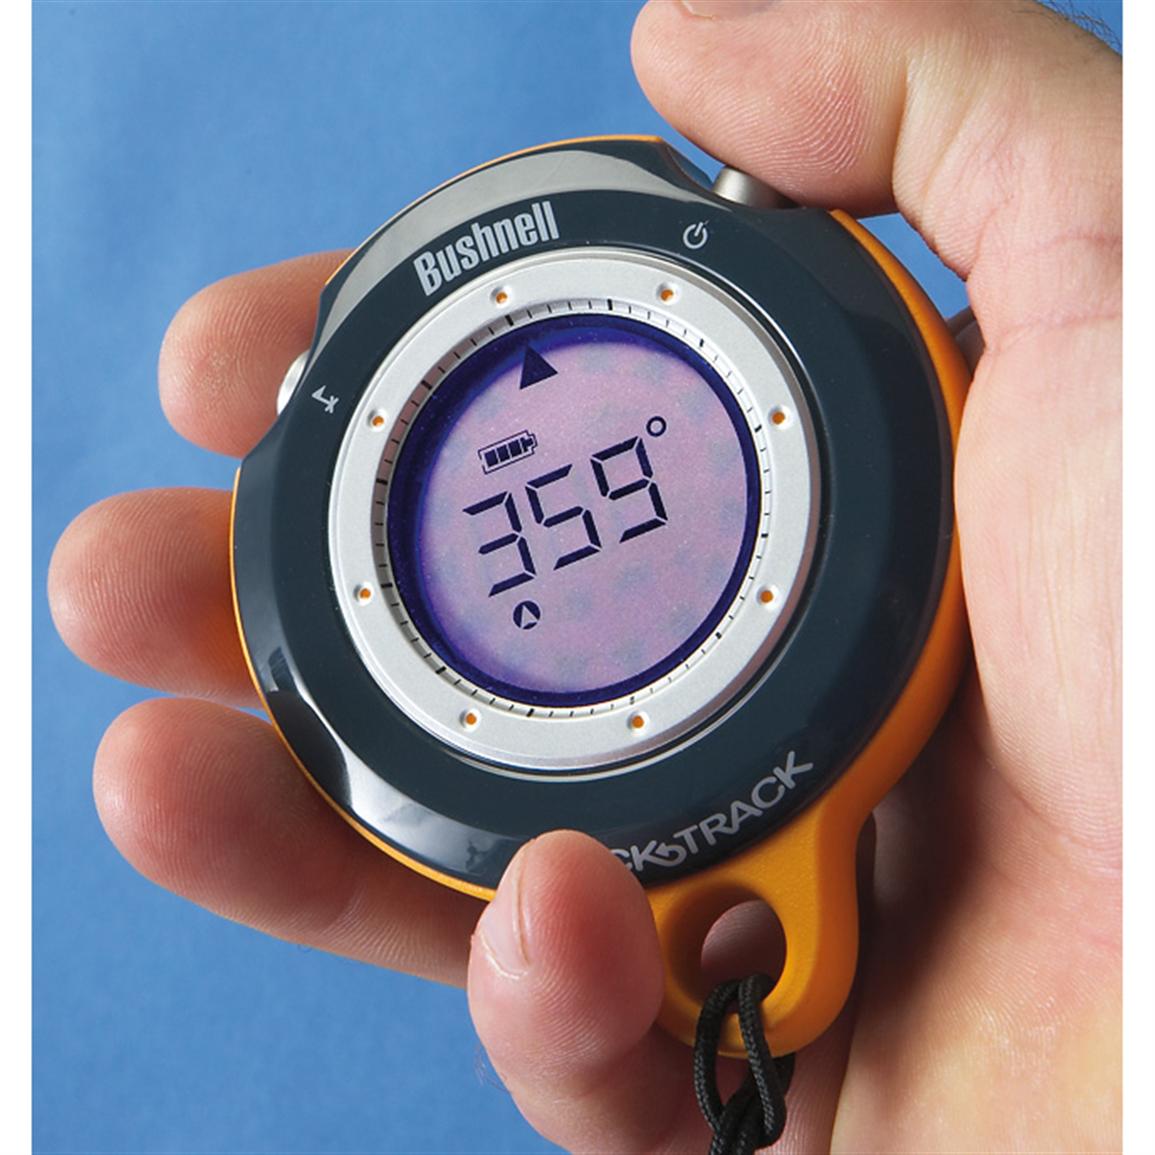 Bushnell® Backtrack™ Personal GPS Locator - 151926, at Sportsman's Guide